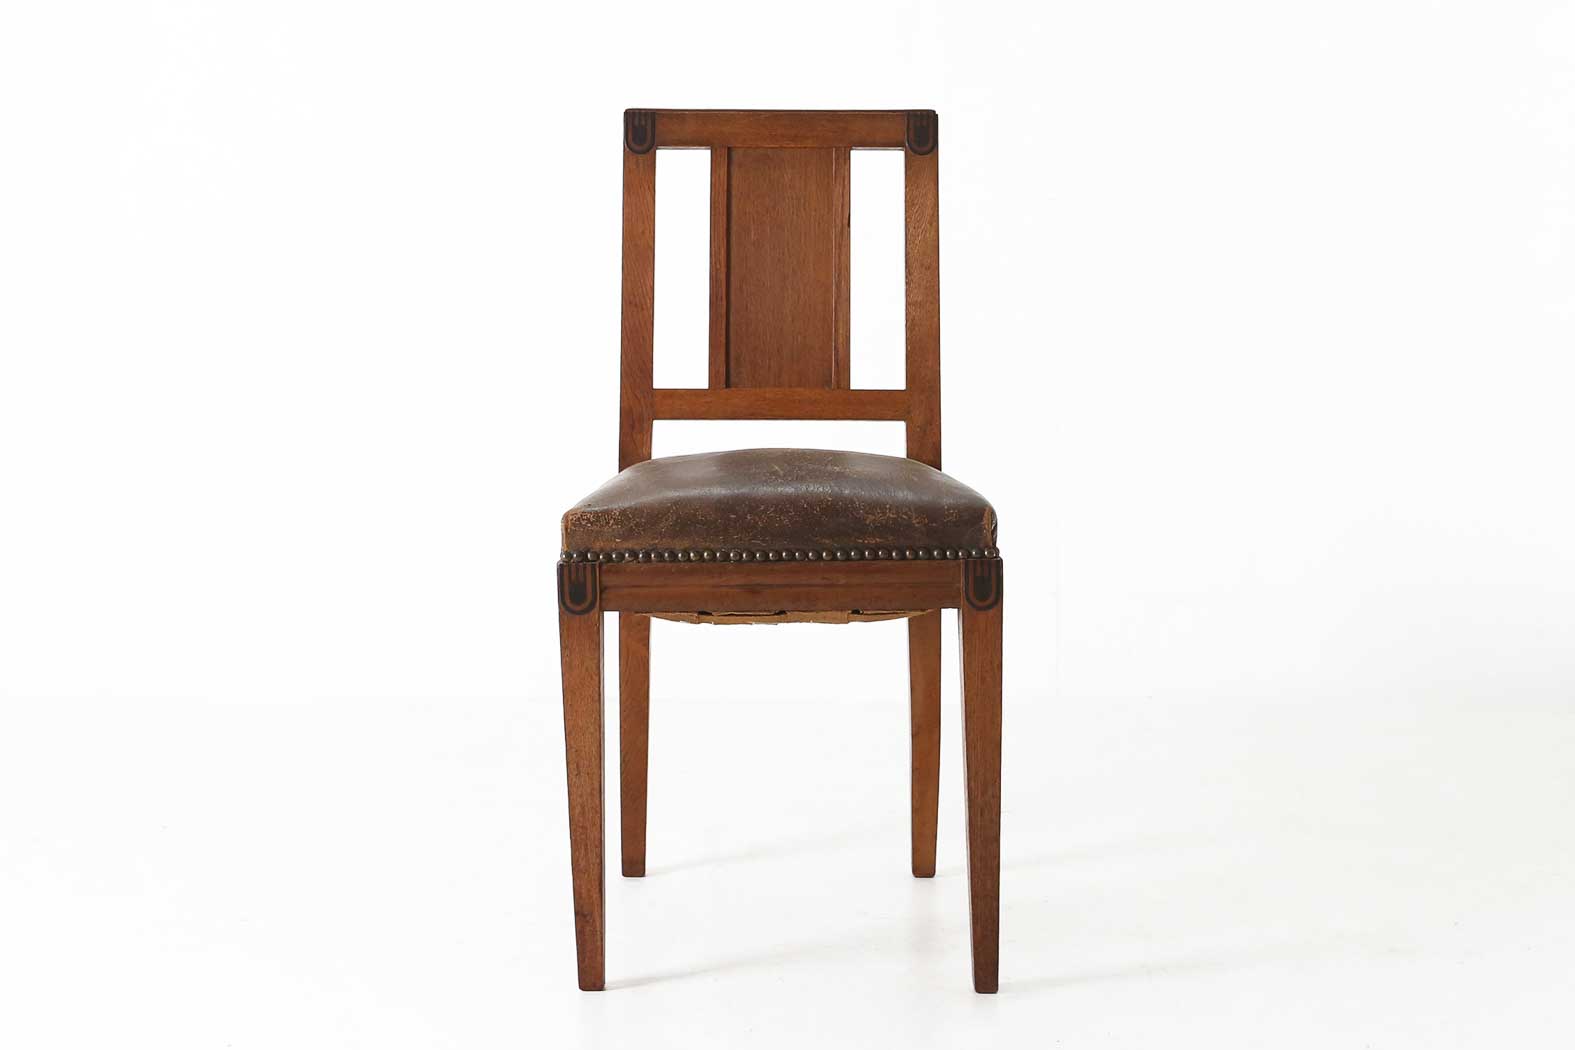 Art Deco chair by Maurice Dufrene 1925